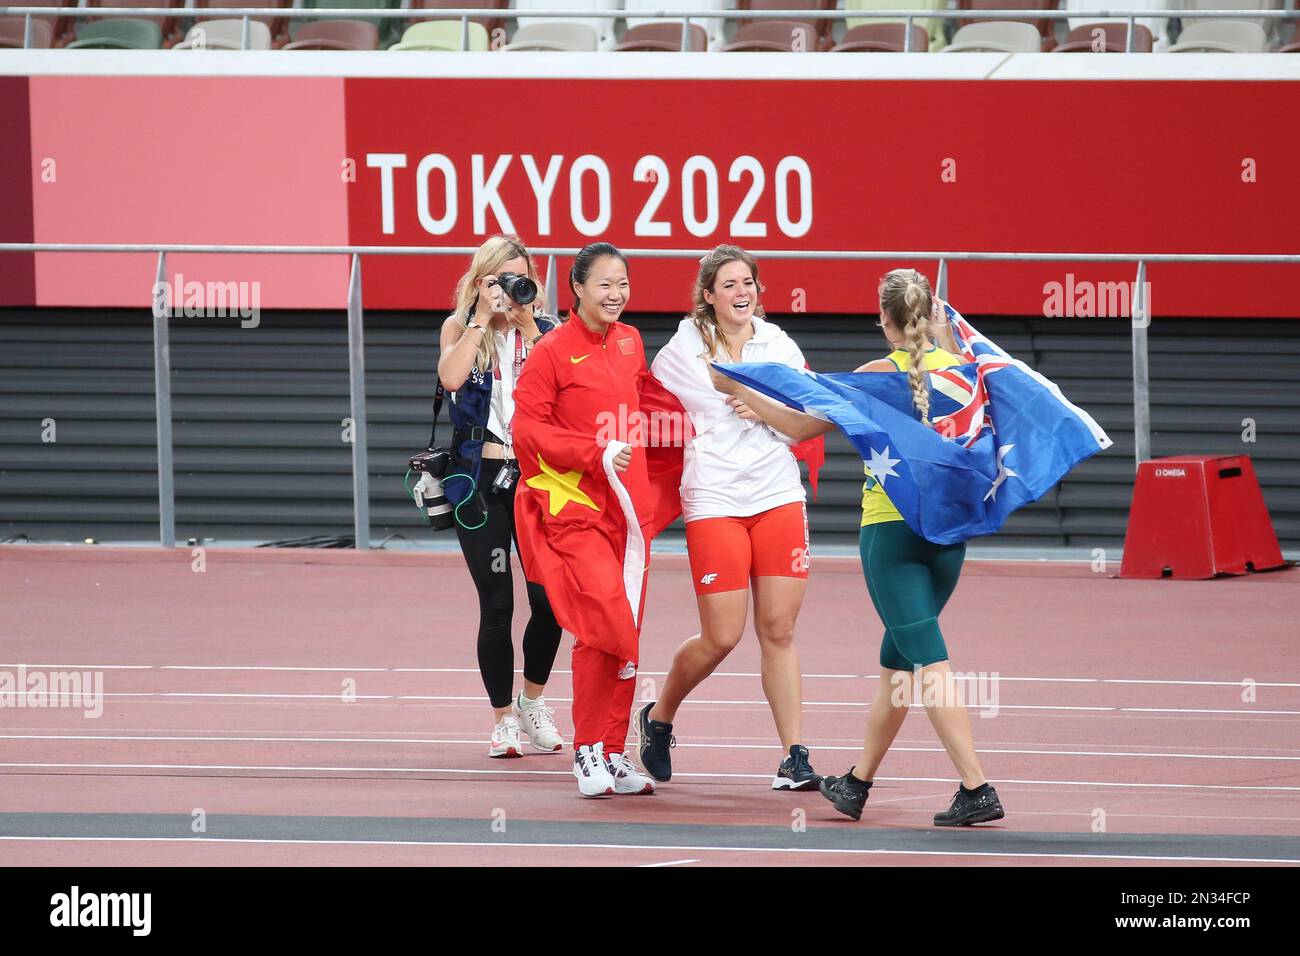 AUG 06, 2021 - Tokyo, Japan: LIU Shiying of China, Maria ANDREJCZYK of Poland and Kelsee-Lee BARBER of Australia win the gold, silver and bronze medal Stock Photo